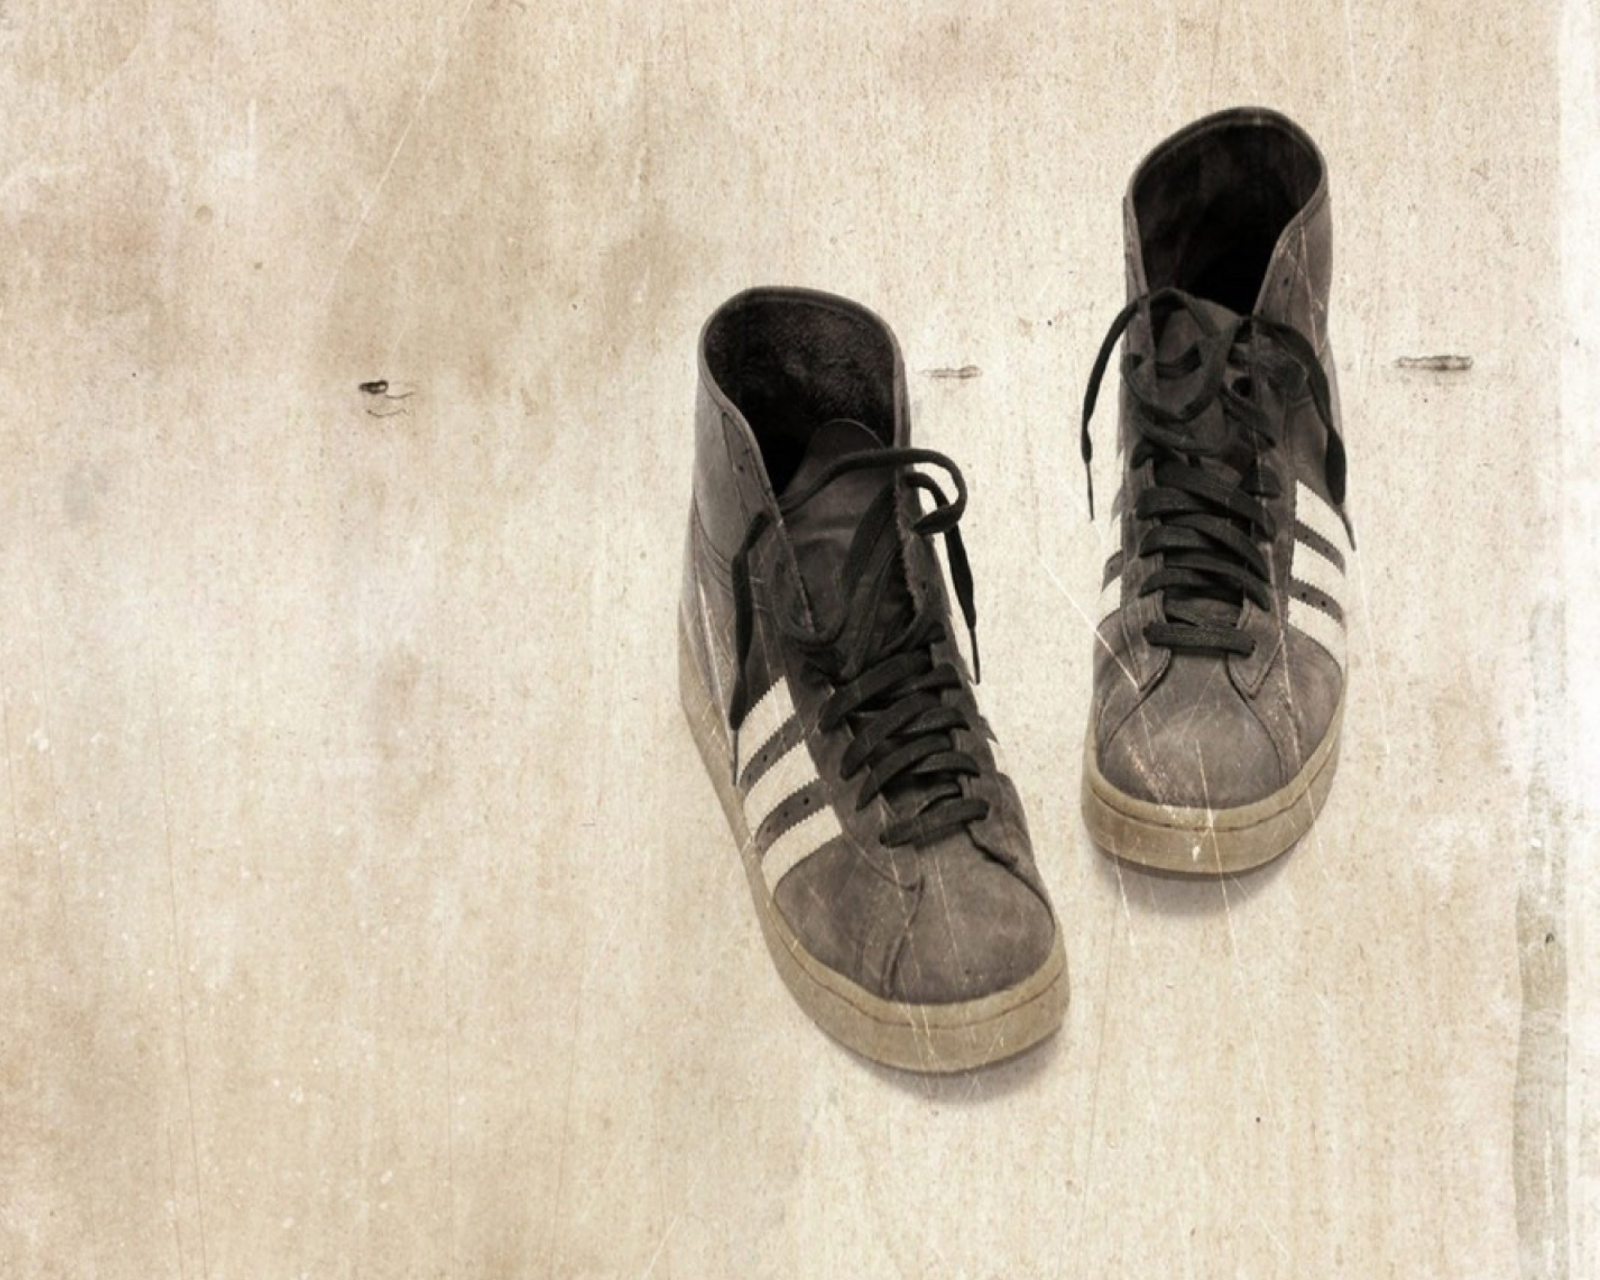 Grungy Sneakers wallpaper 1600x1280